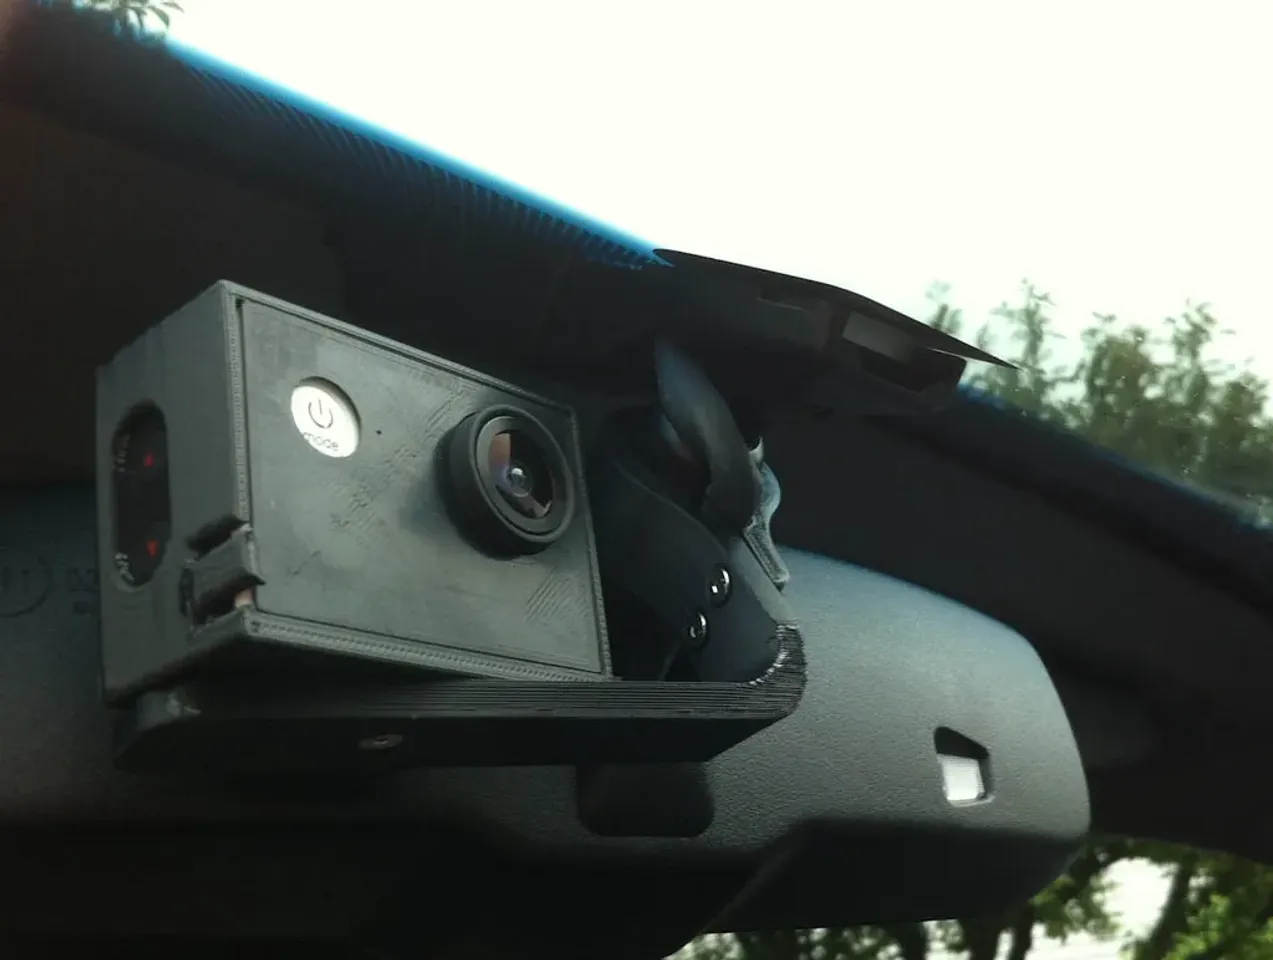 Does anyone know of a dashcam that would fit a GoPro mount